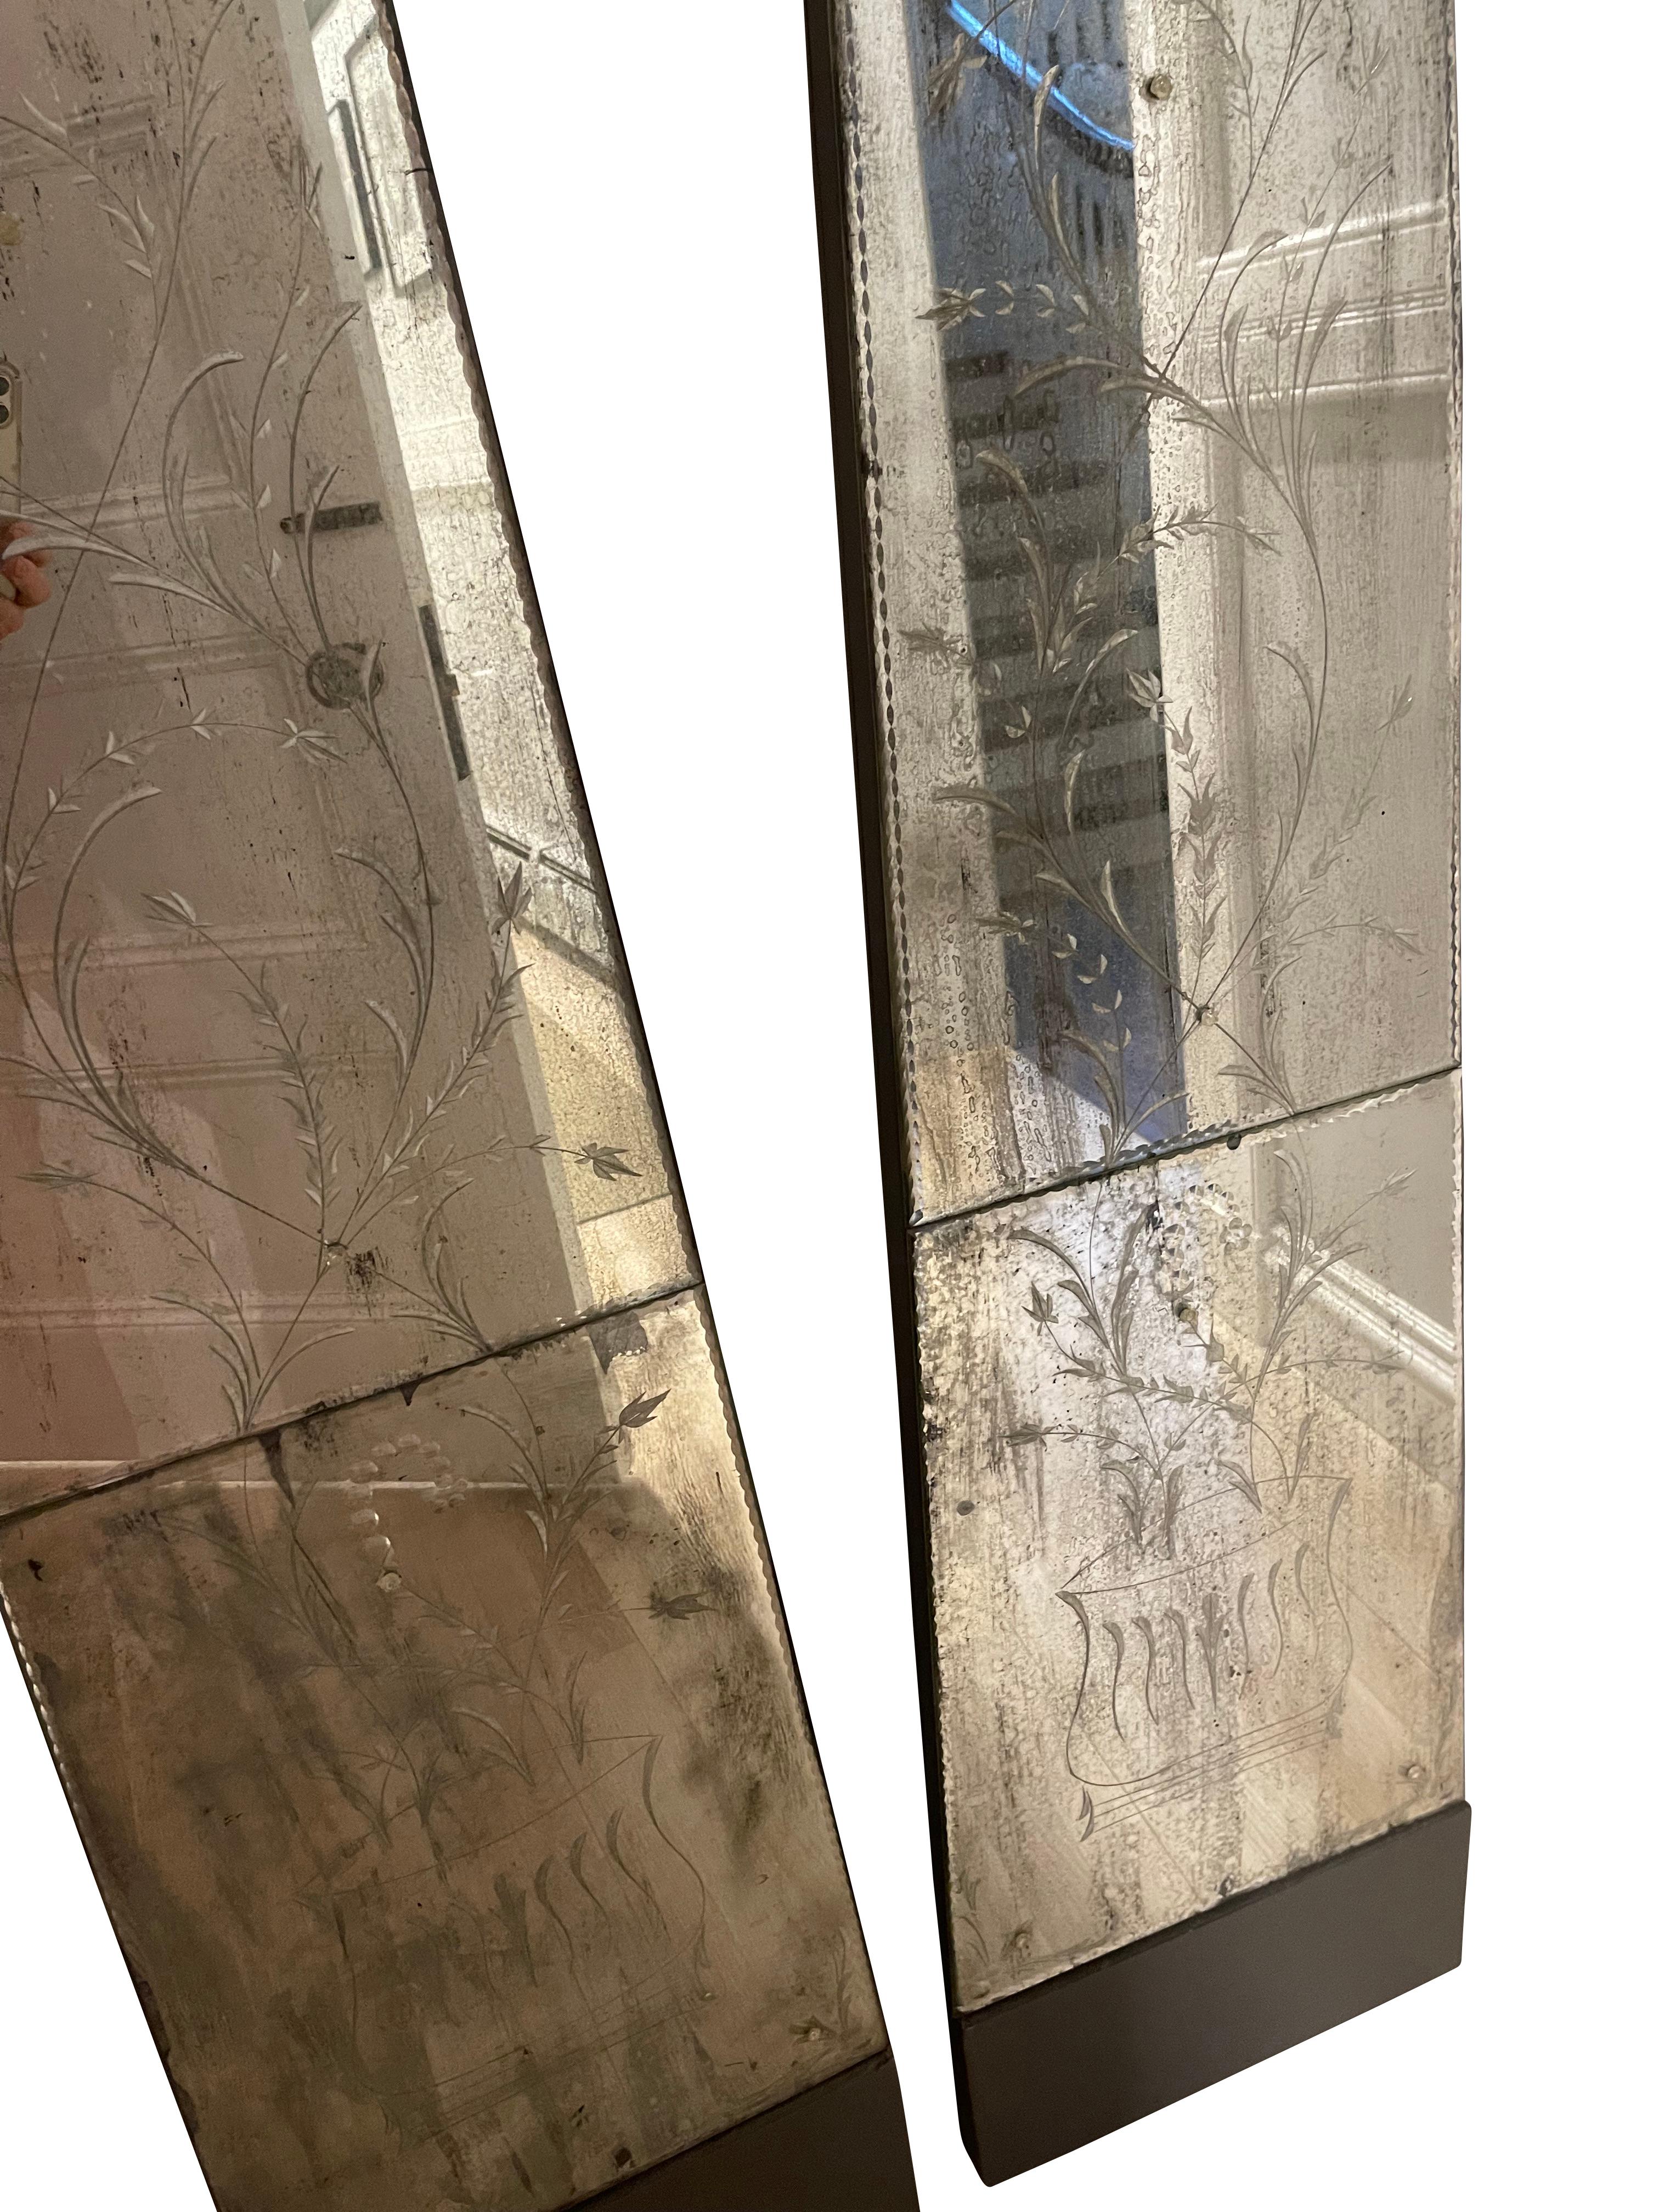 Pair of Obelisk Mirrored Panels with Botanical Etchings 1